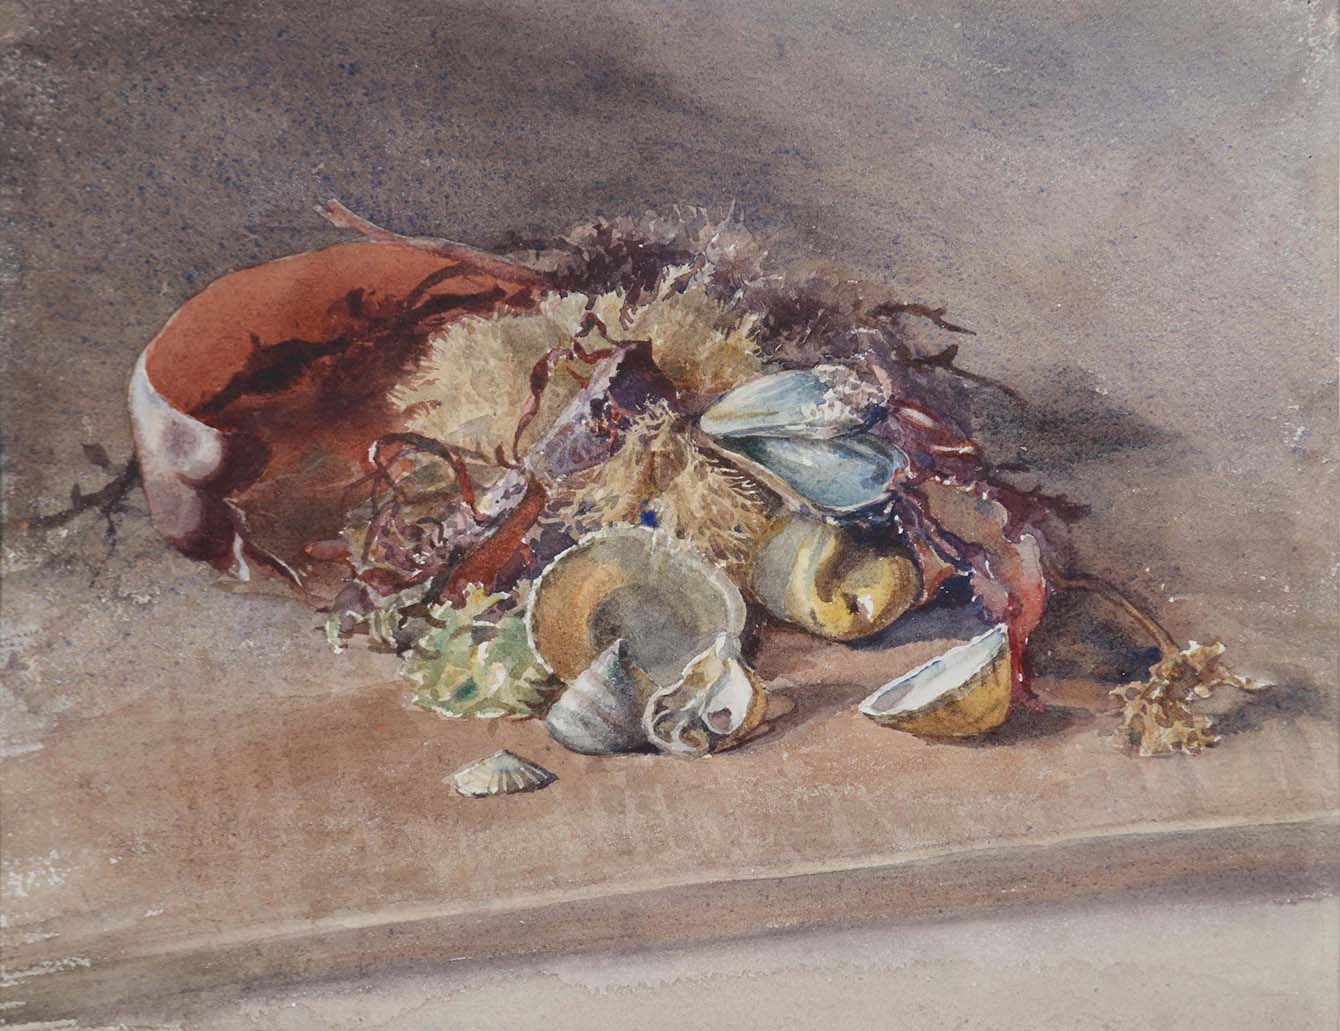 Judith Ackland's watercolour of a variety of seashells